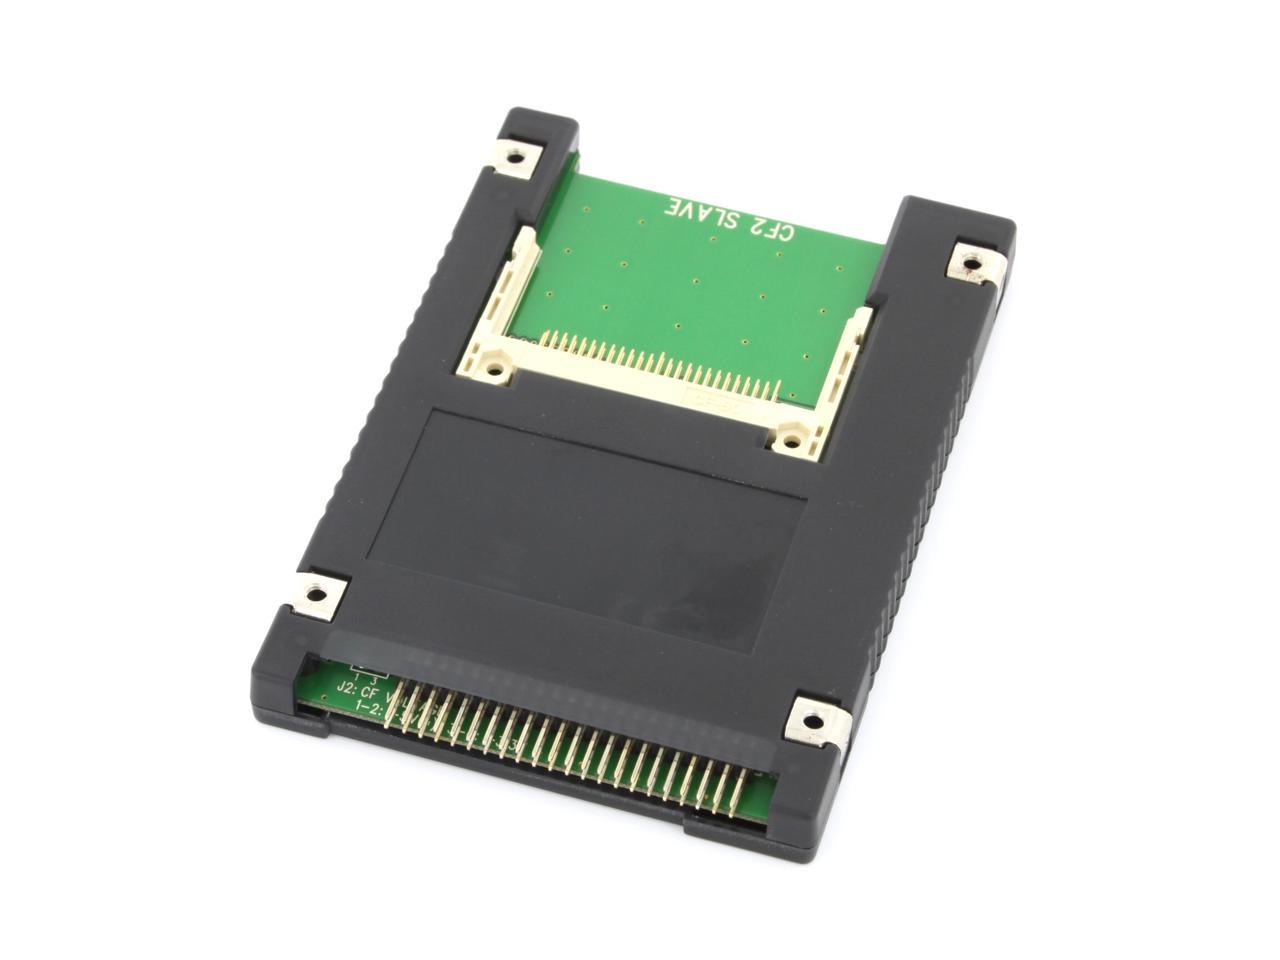 to Compact Flash Adapter 106266 40-Pin Monoprice Ultra IDE